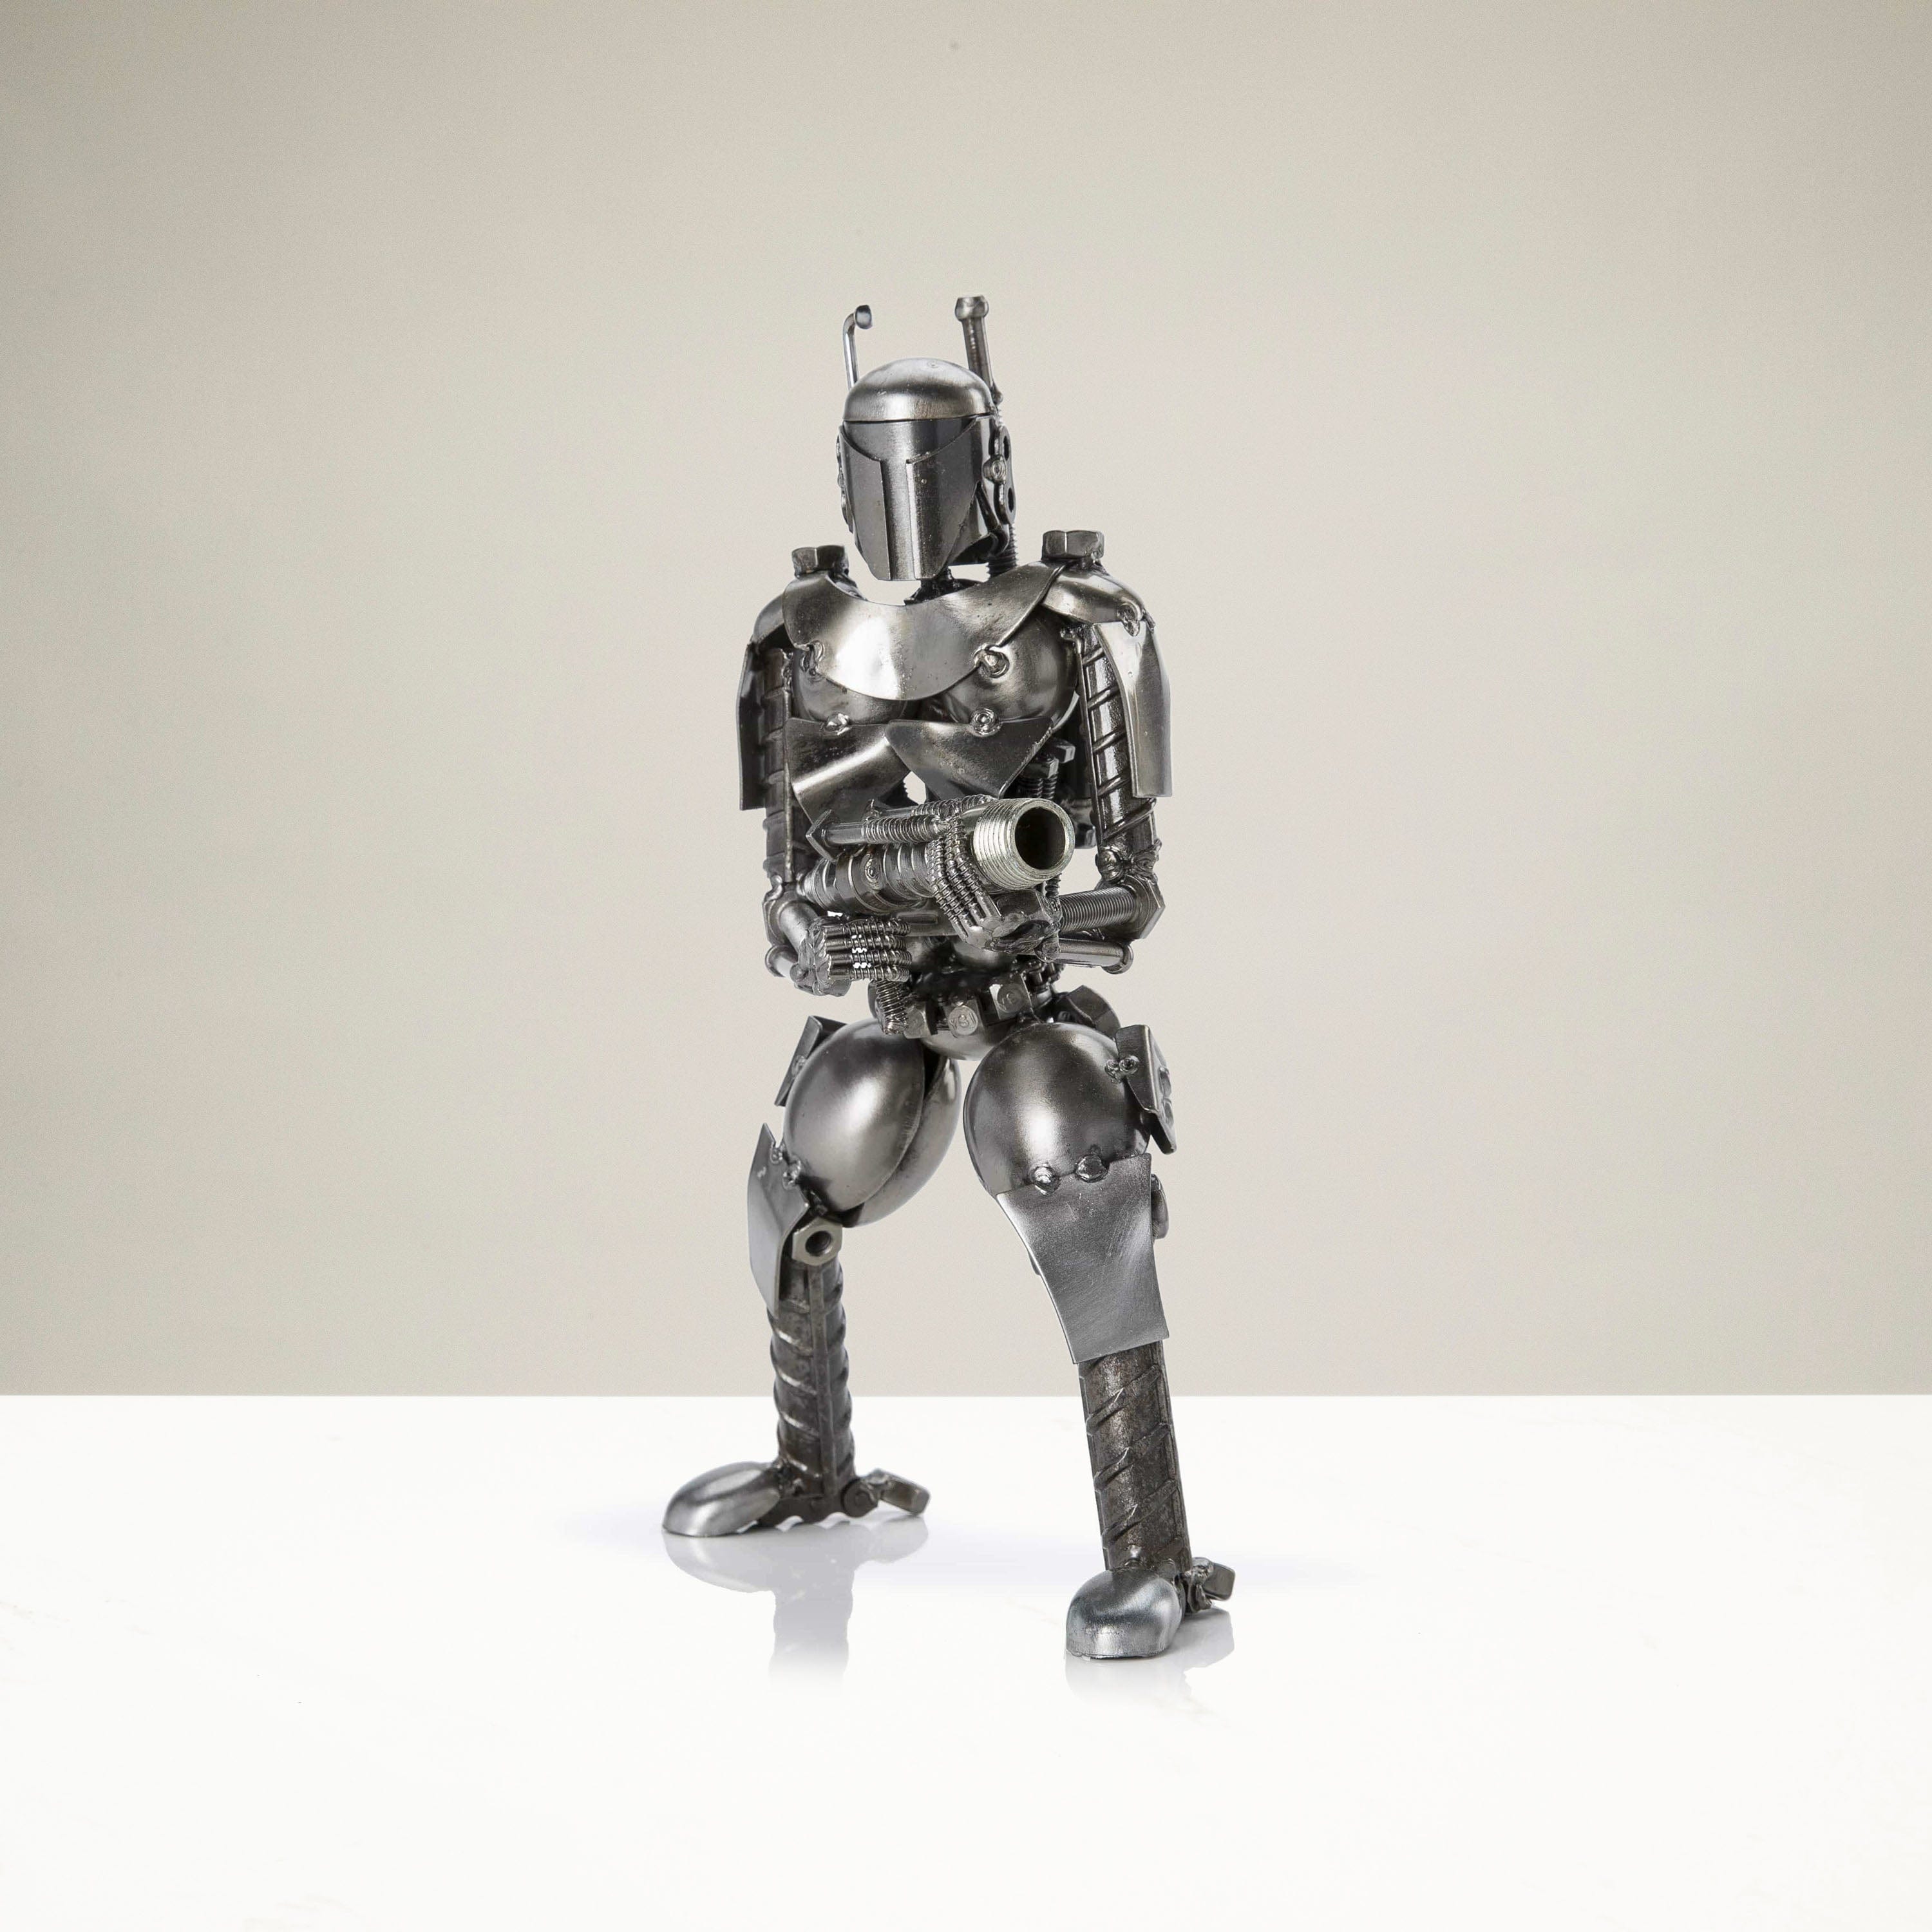 Kalifano Recycled Metal Art Jango Fett with Blaster Inspired Recycled Metal Sculpture RMS-700JFA-N